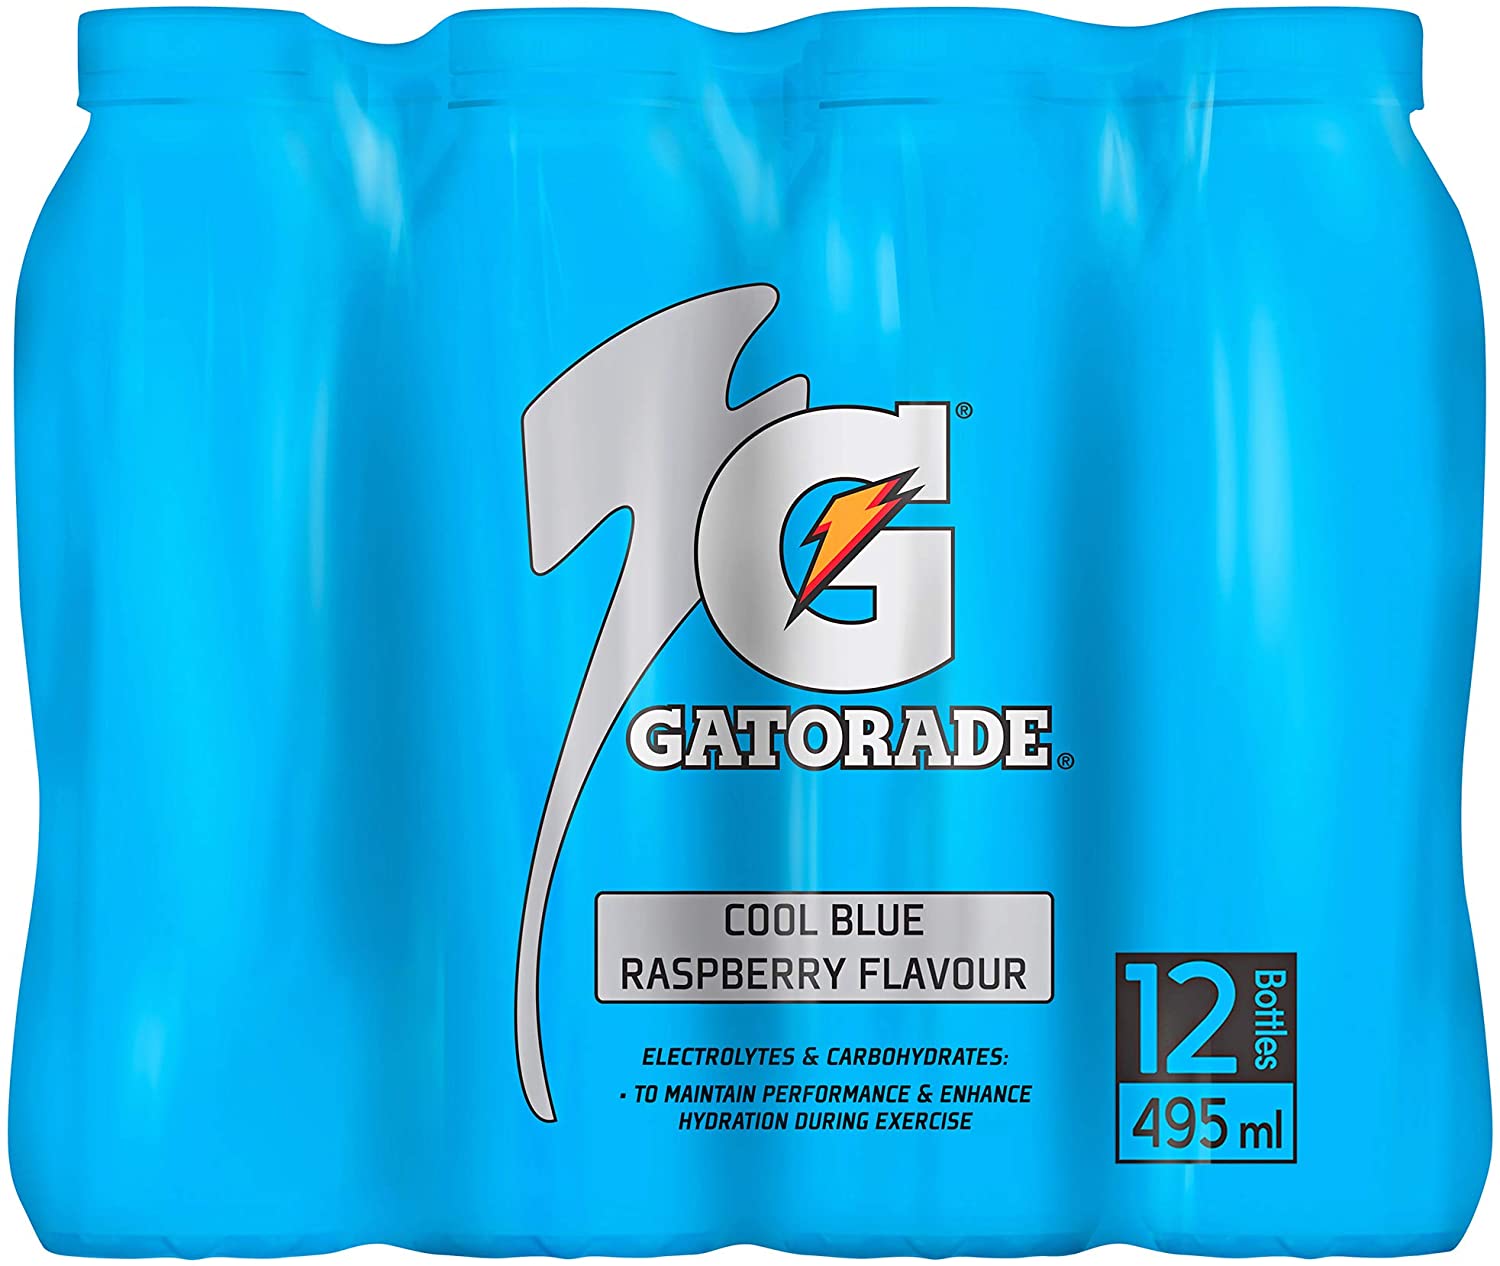 GATORADE Cool Blue Flavour Sports Drink, 495ml - Pack Of 12